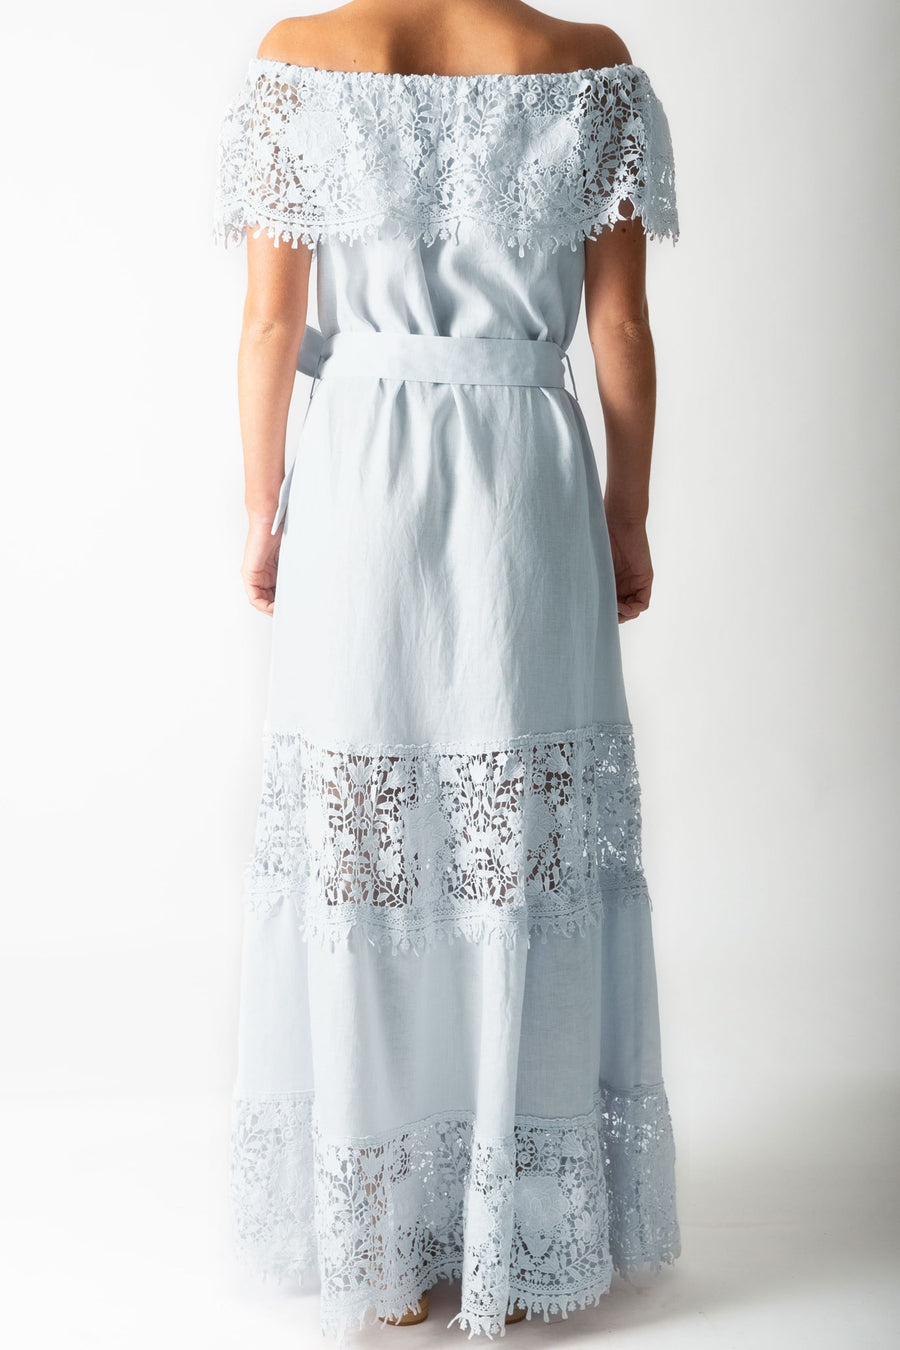 This is a back view photo of a woman wearing a light blue maxi dress with lace trim across the shoulders, a linen sash for a belt, and tiers of linen and lace down the dress skirt.